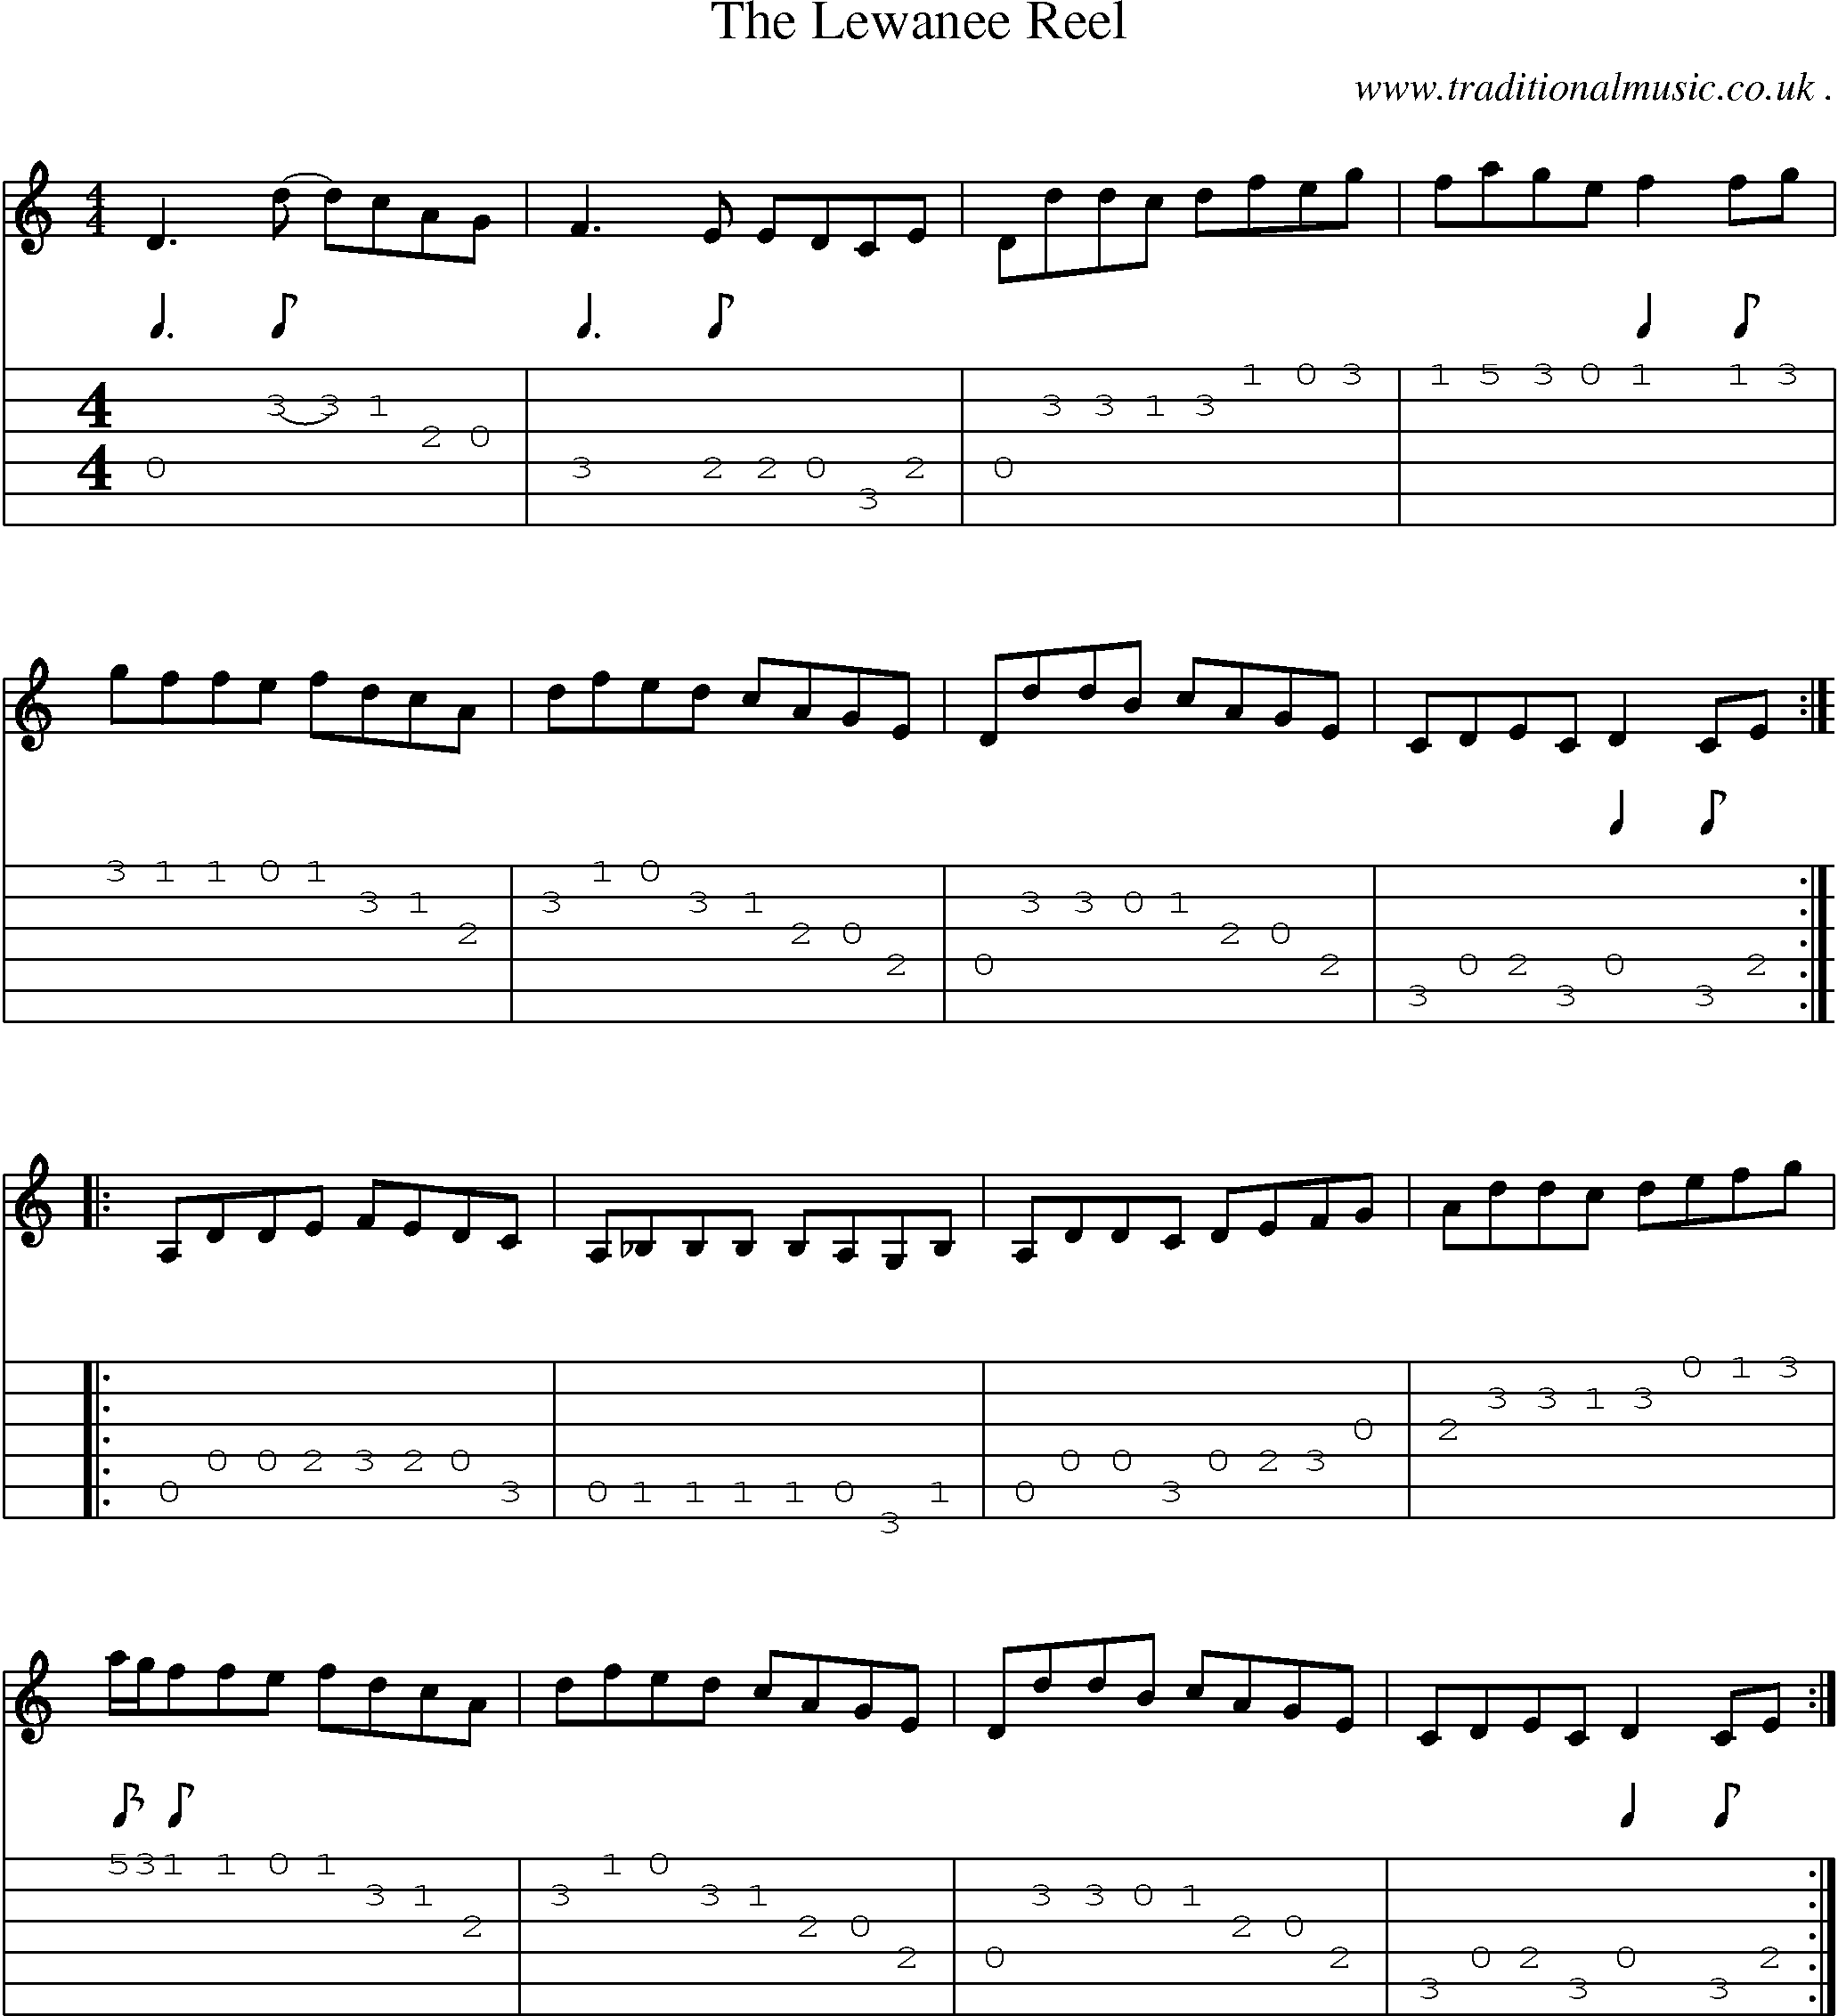 Sheet-Music and Guitar Tabs for The Lewanee Reel